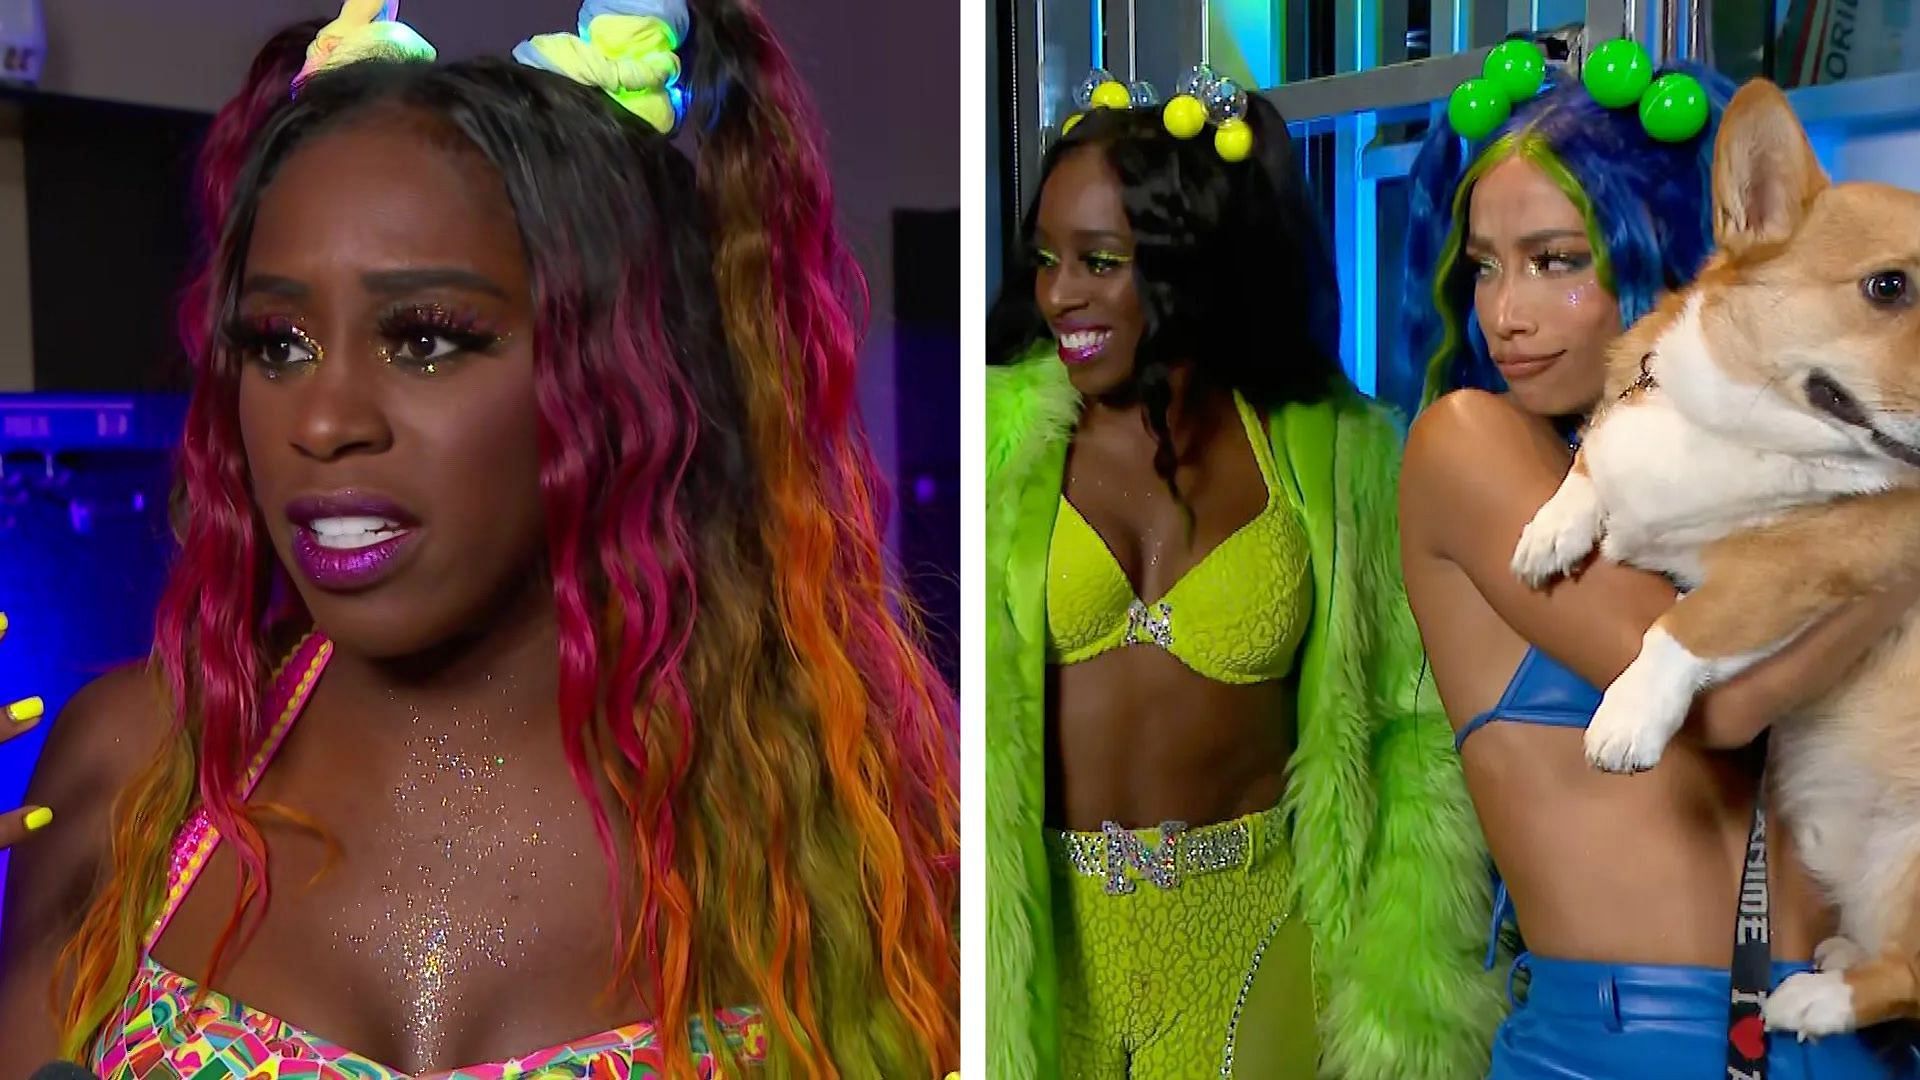 Naomi could potentially return to WWE without Sasha Banks